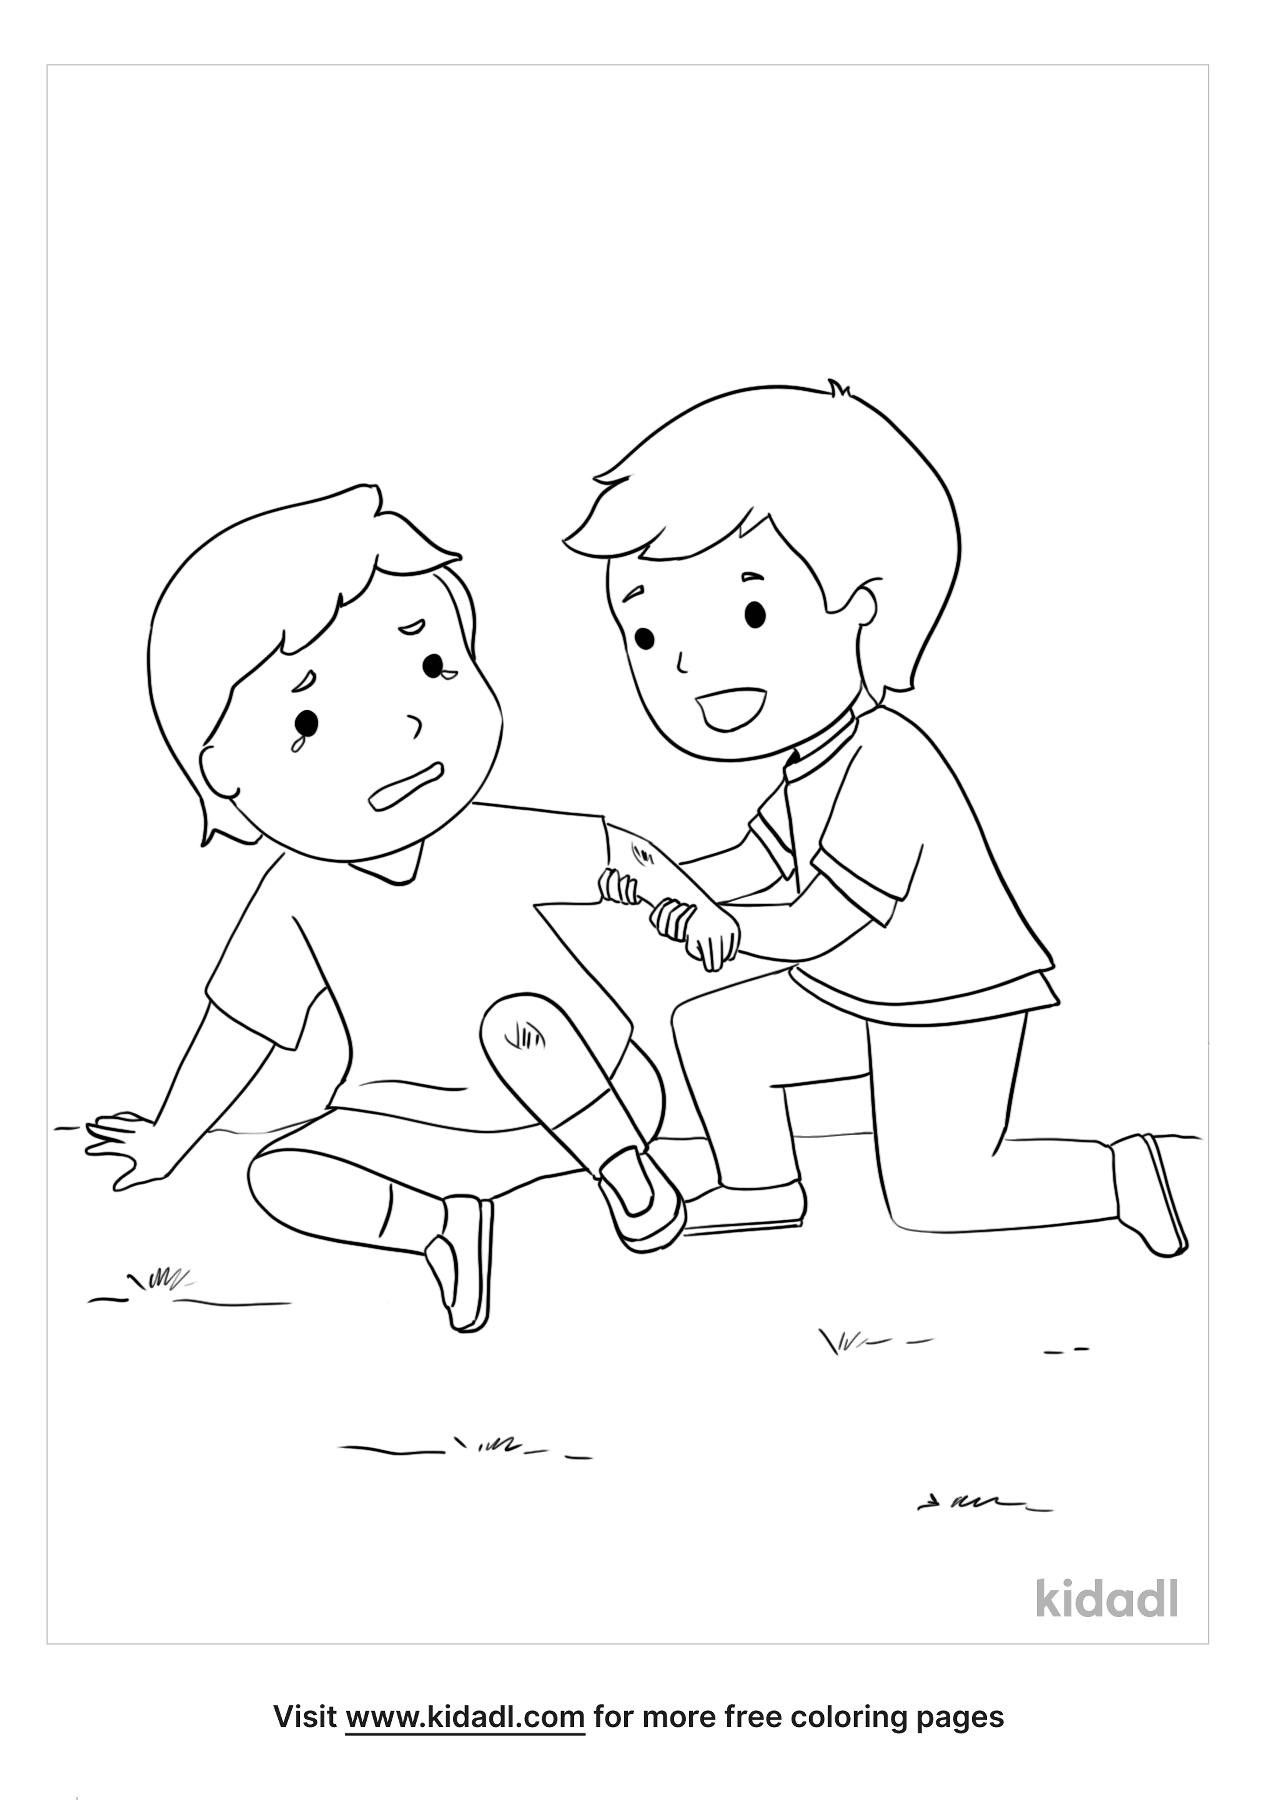 coloring page that have caring friends